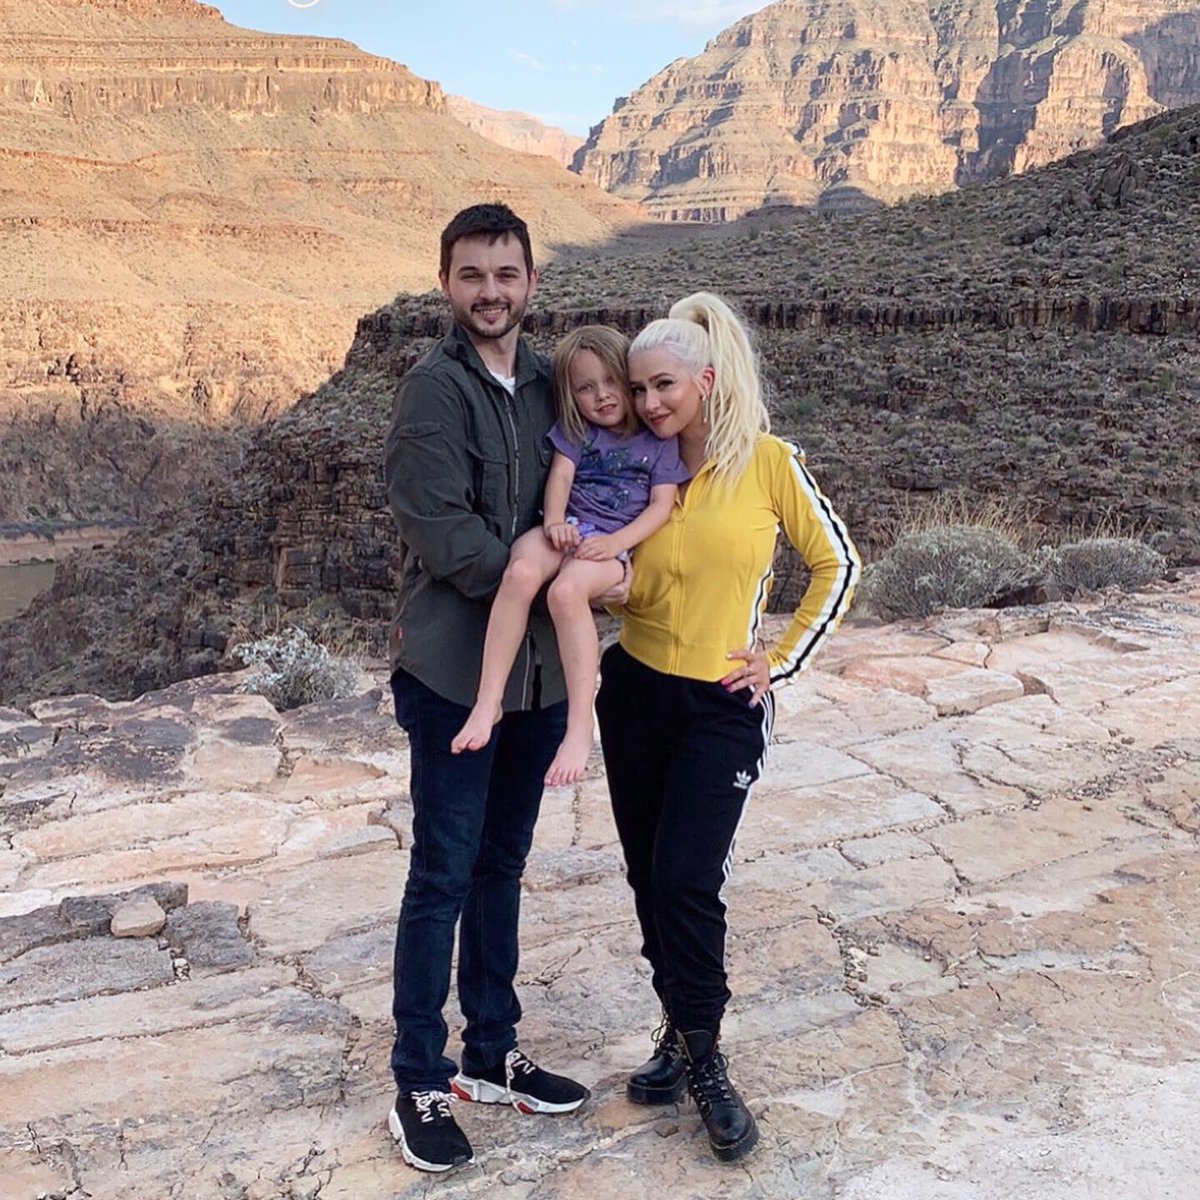 Grand Canyon helicopter/ picnic trip for Father’s day!!☀️???????? Much love to all you celebrating today! https://t.co/dw9mYwMmo8